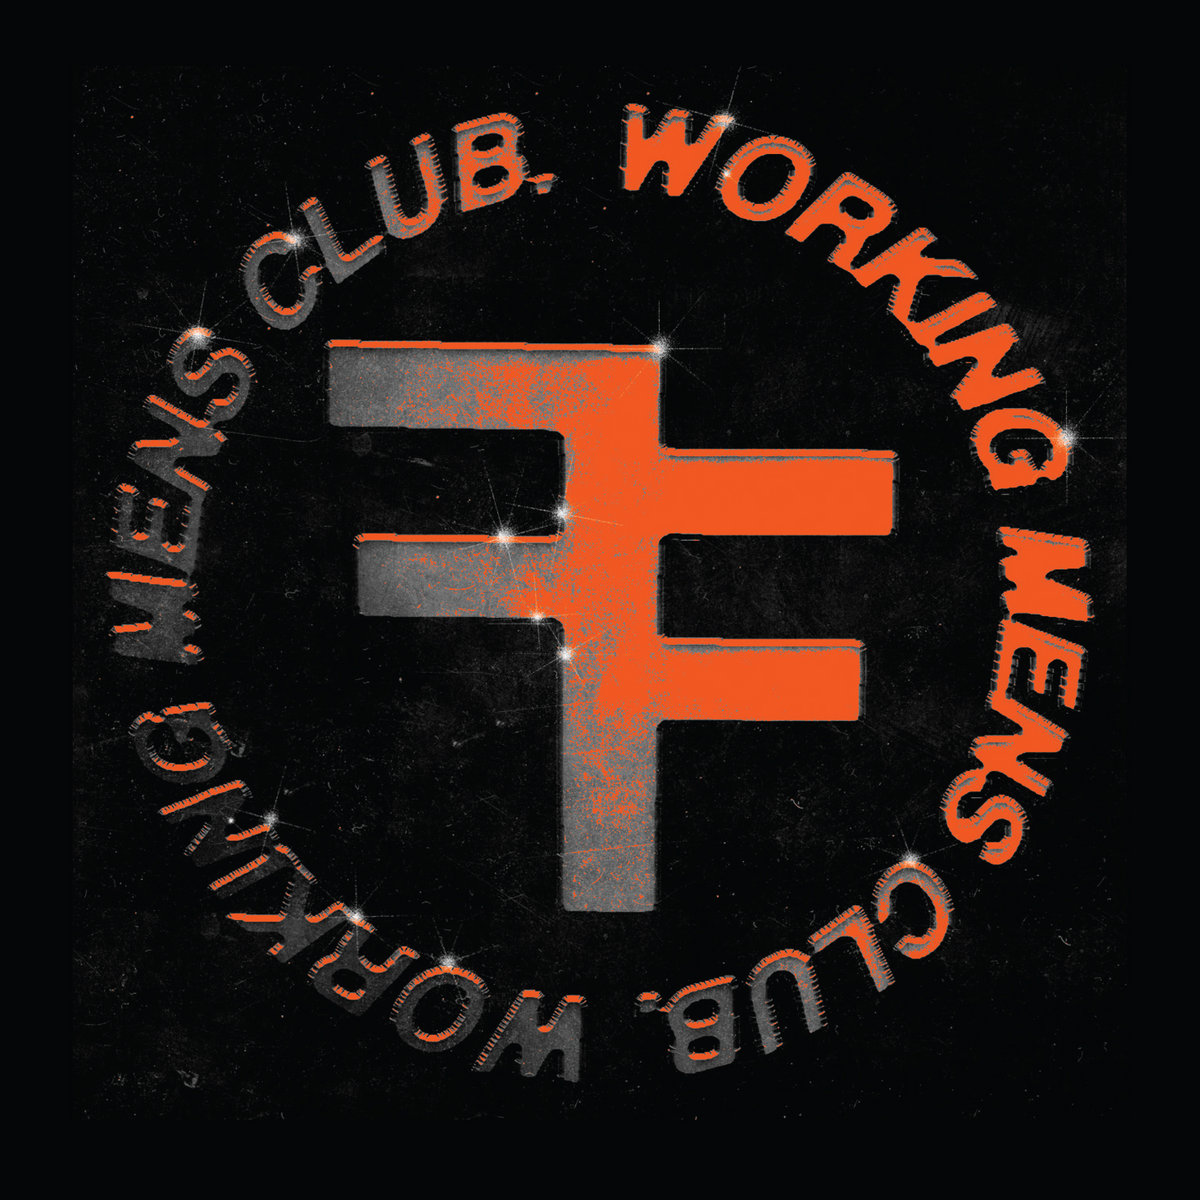 News – Working Men’s Club – Fear Fear – Deluxe edition